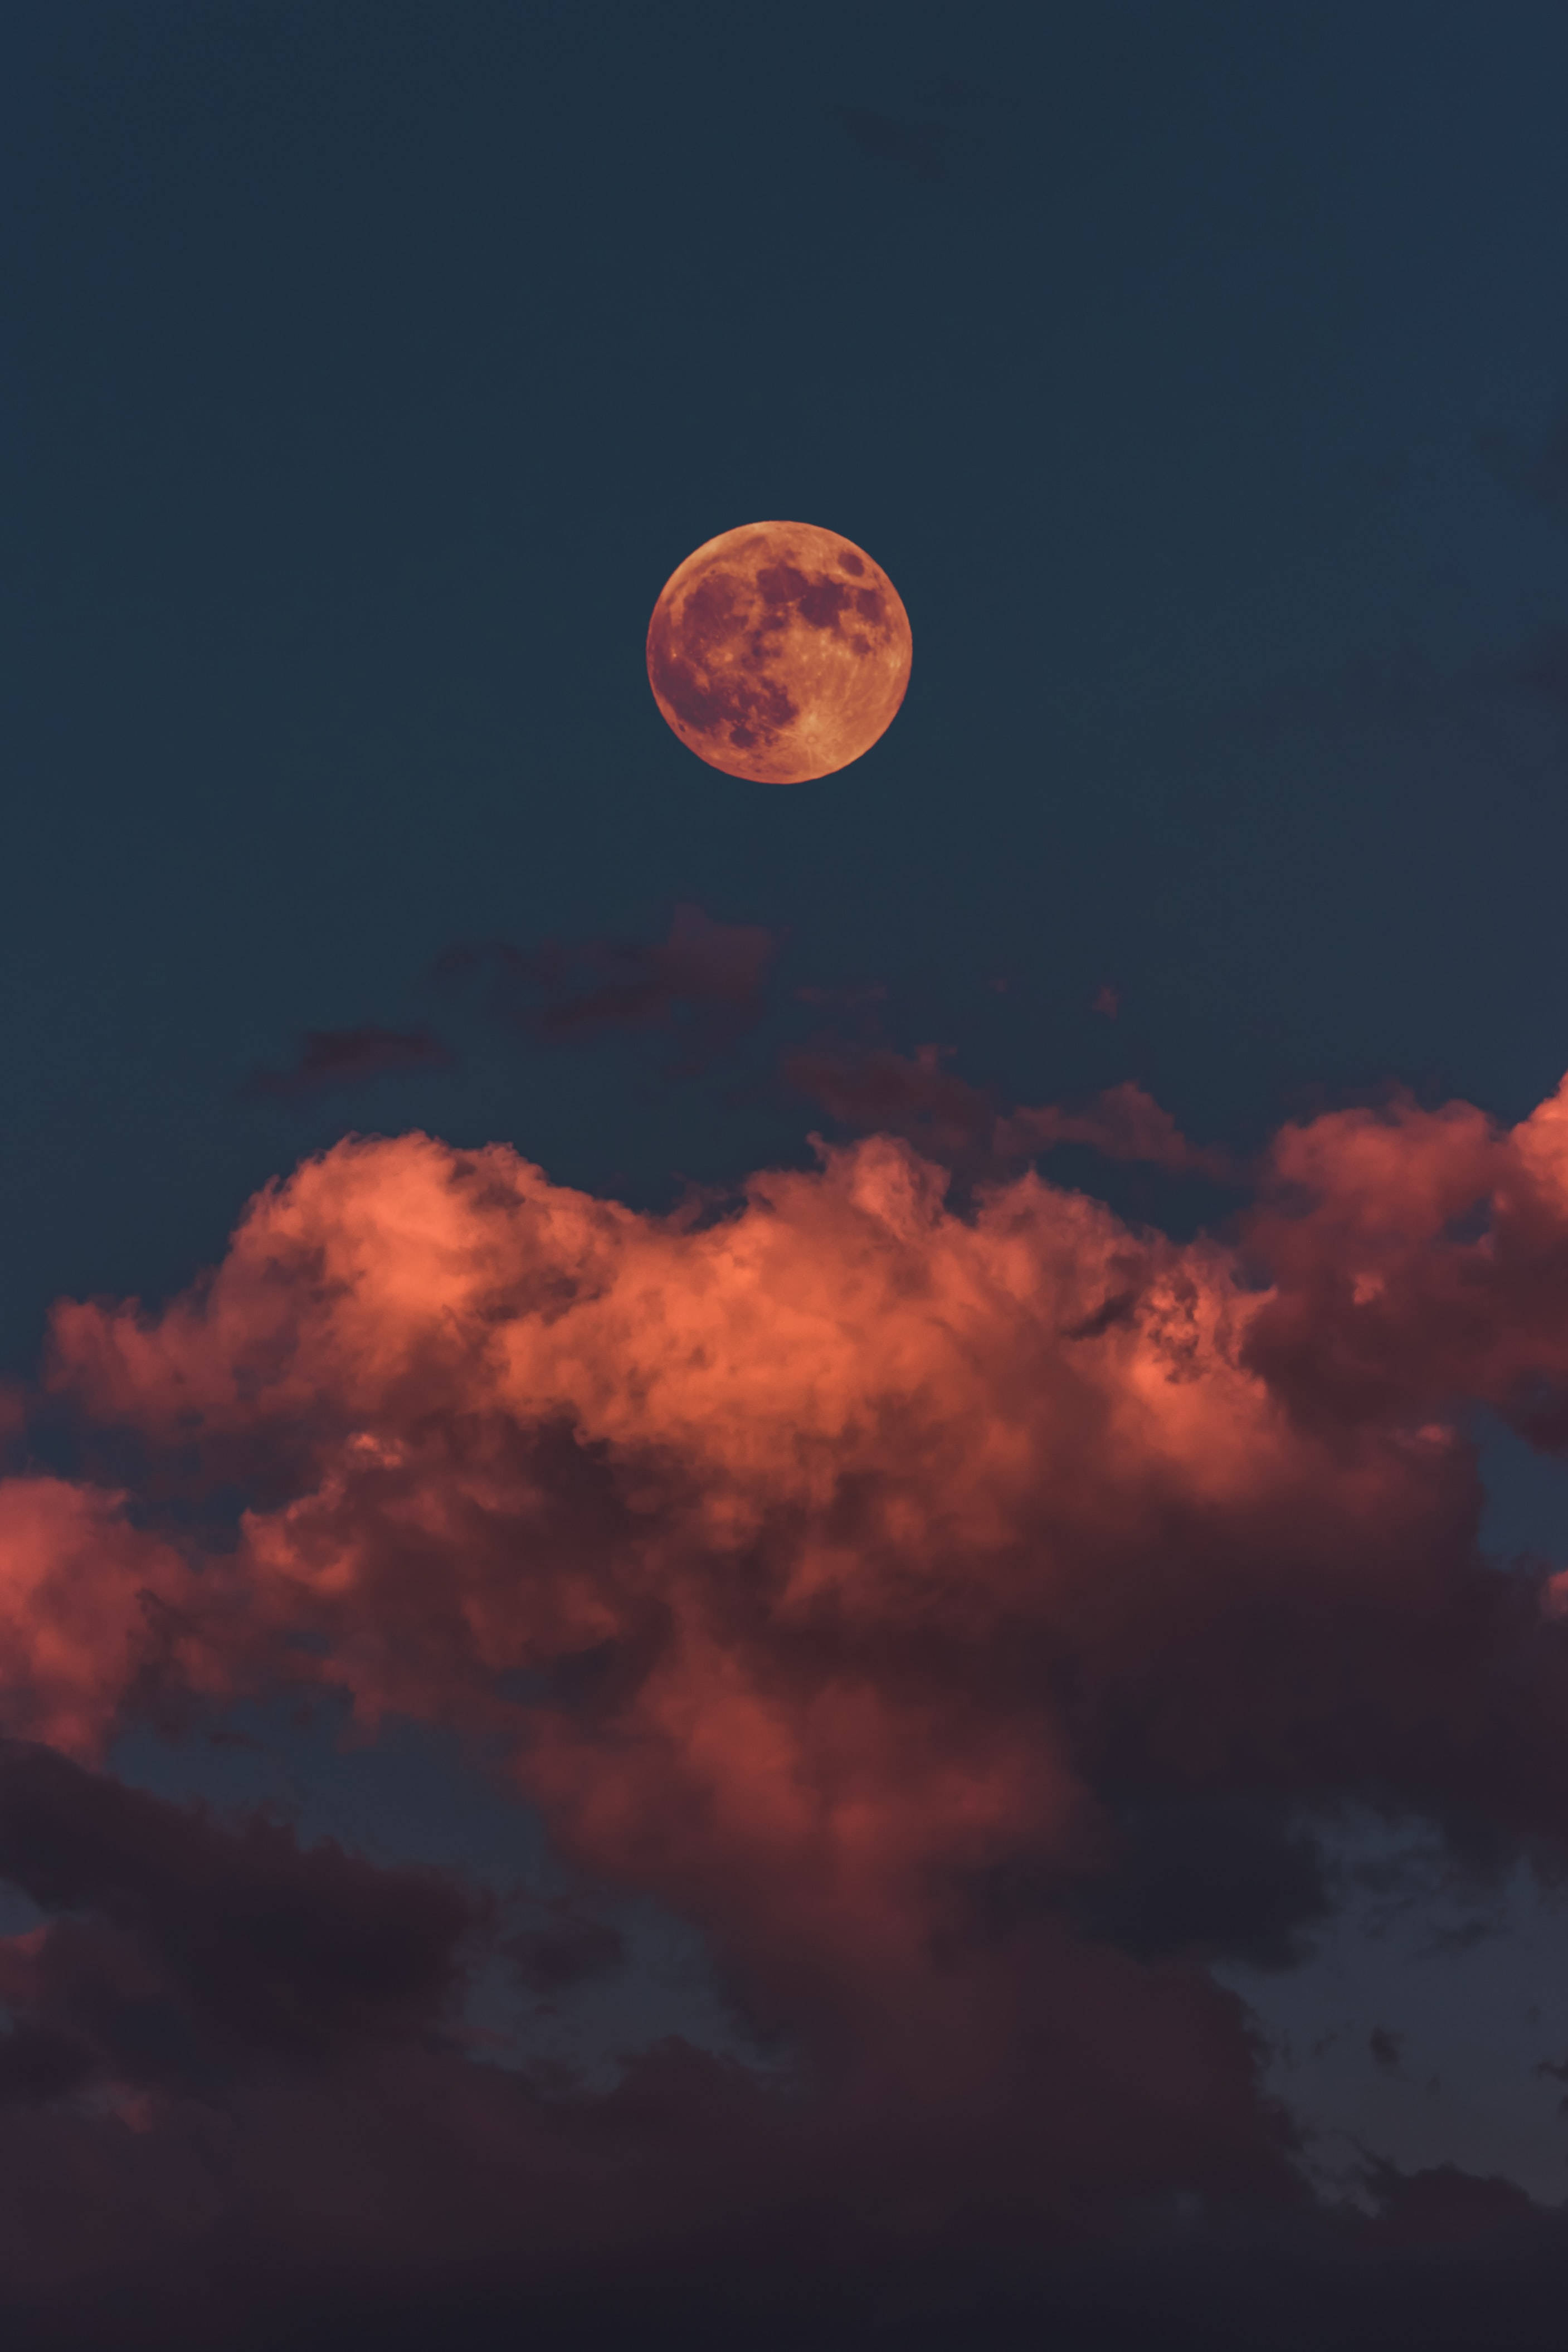 Spectacular Red Moon Glow On A Cloud-strewn Night Sky - 4k Ultra Hd Background